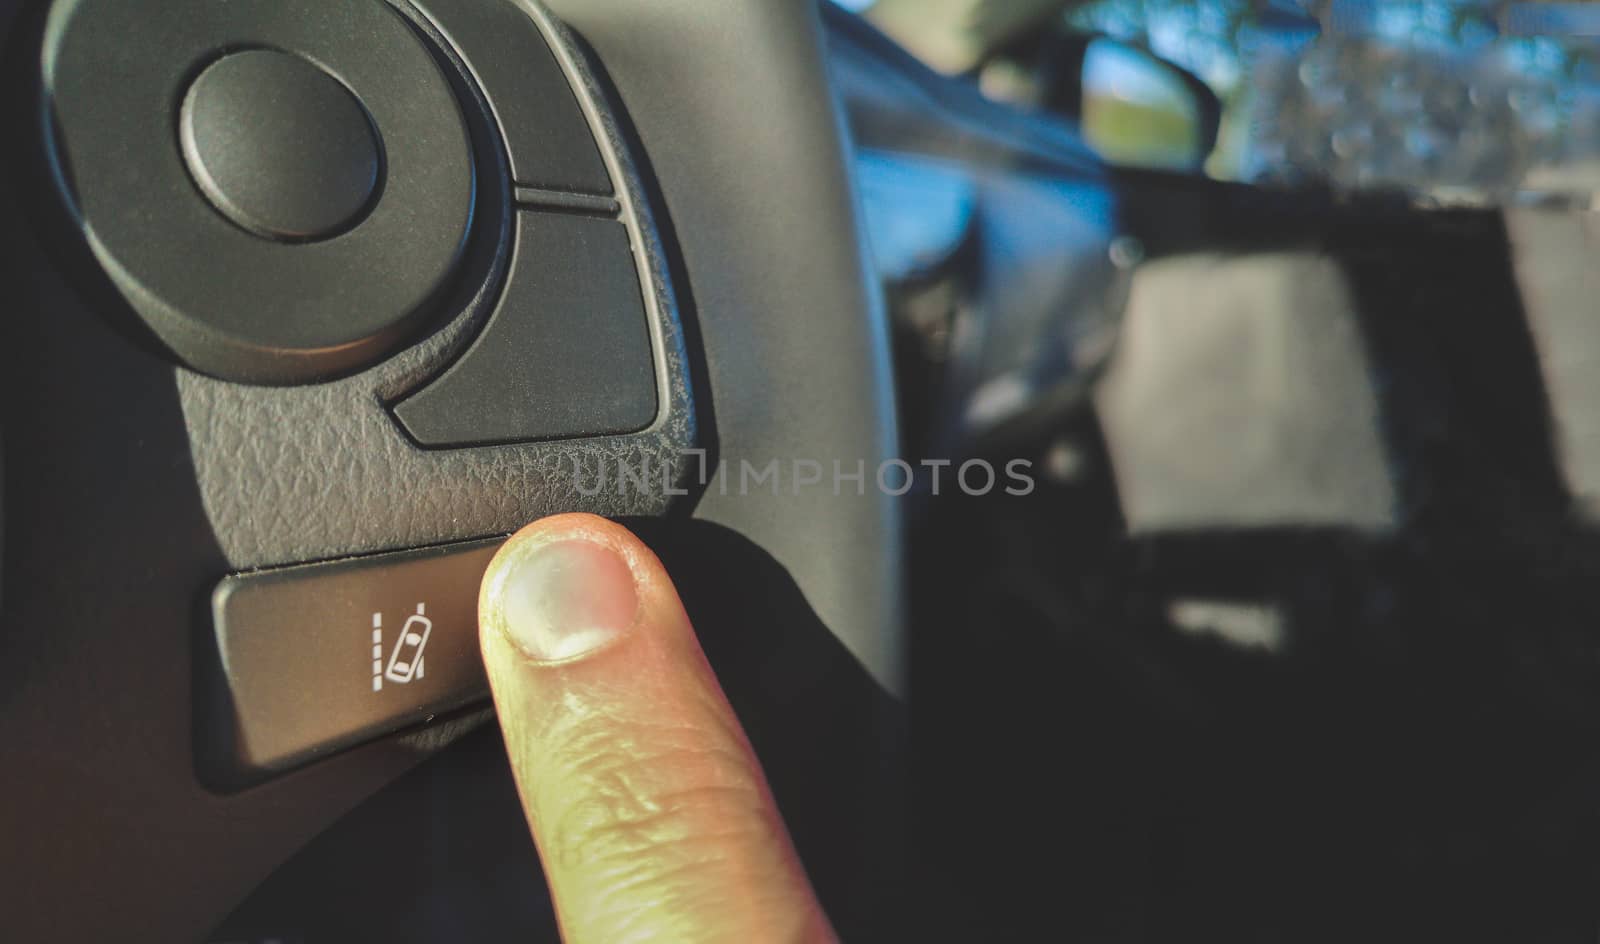 lane change assist system  button on the steering wheel of car by LucaLorenzelli